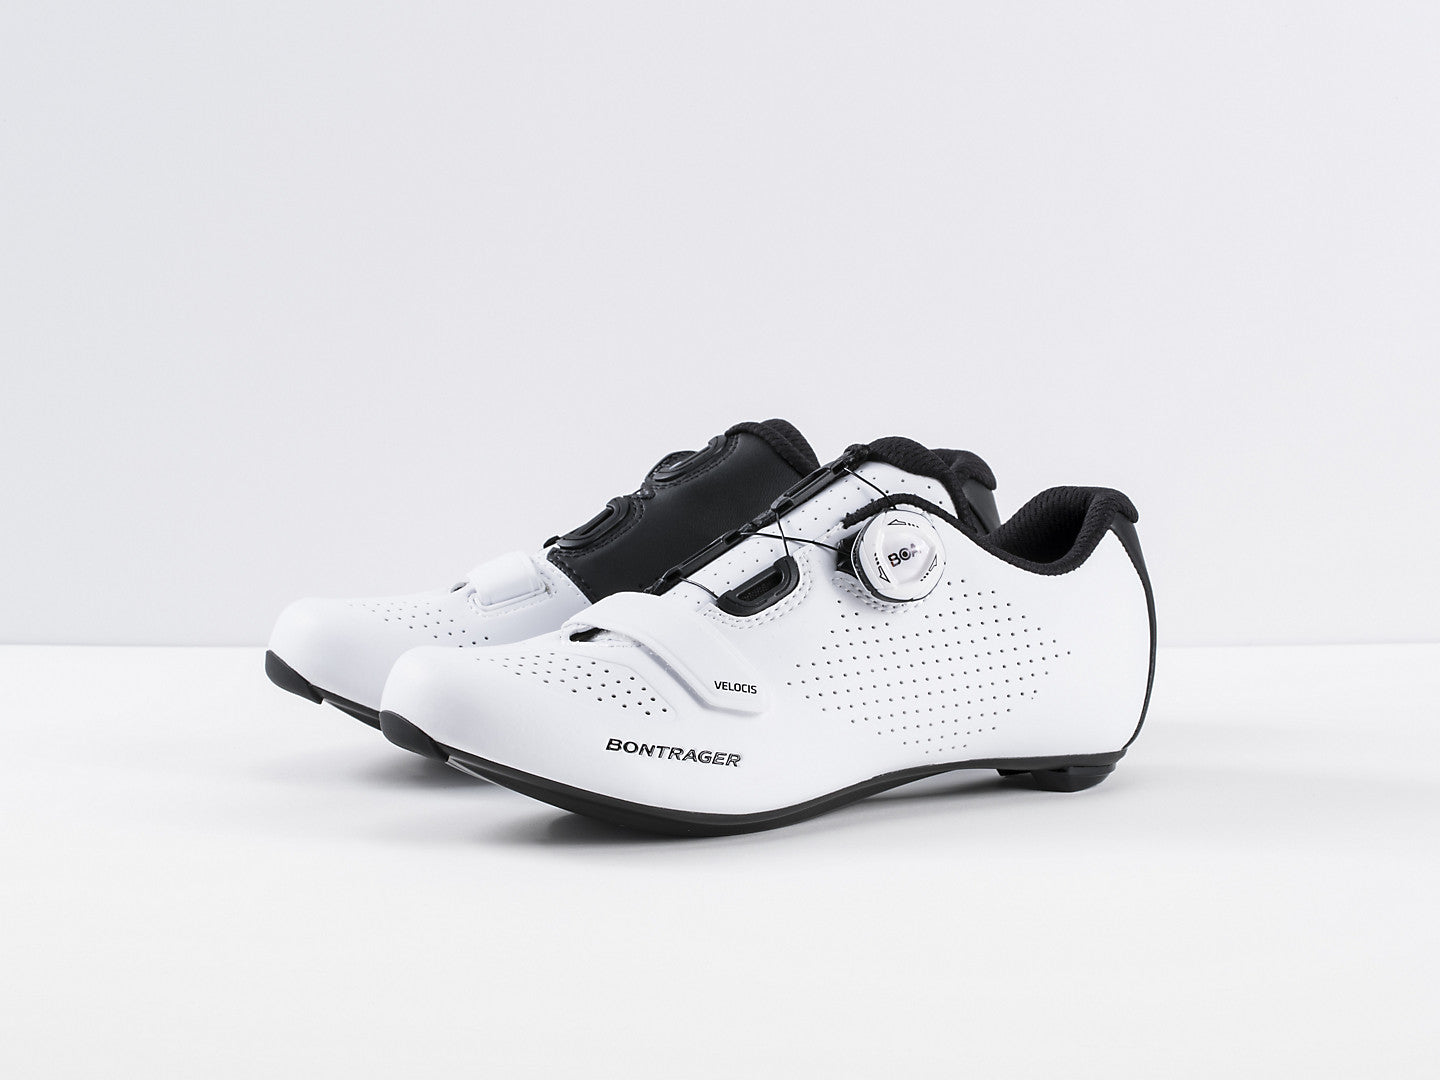 Bontrager Velocis Women's Road Cycling Shoes